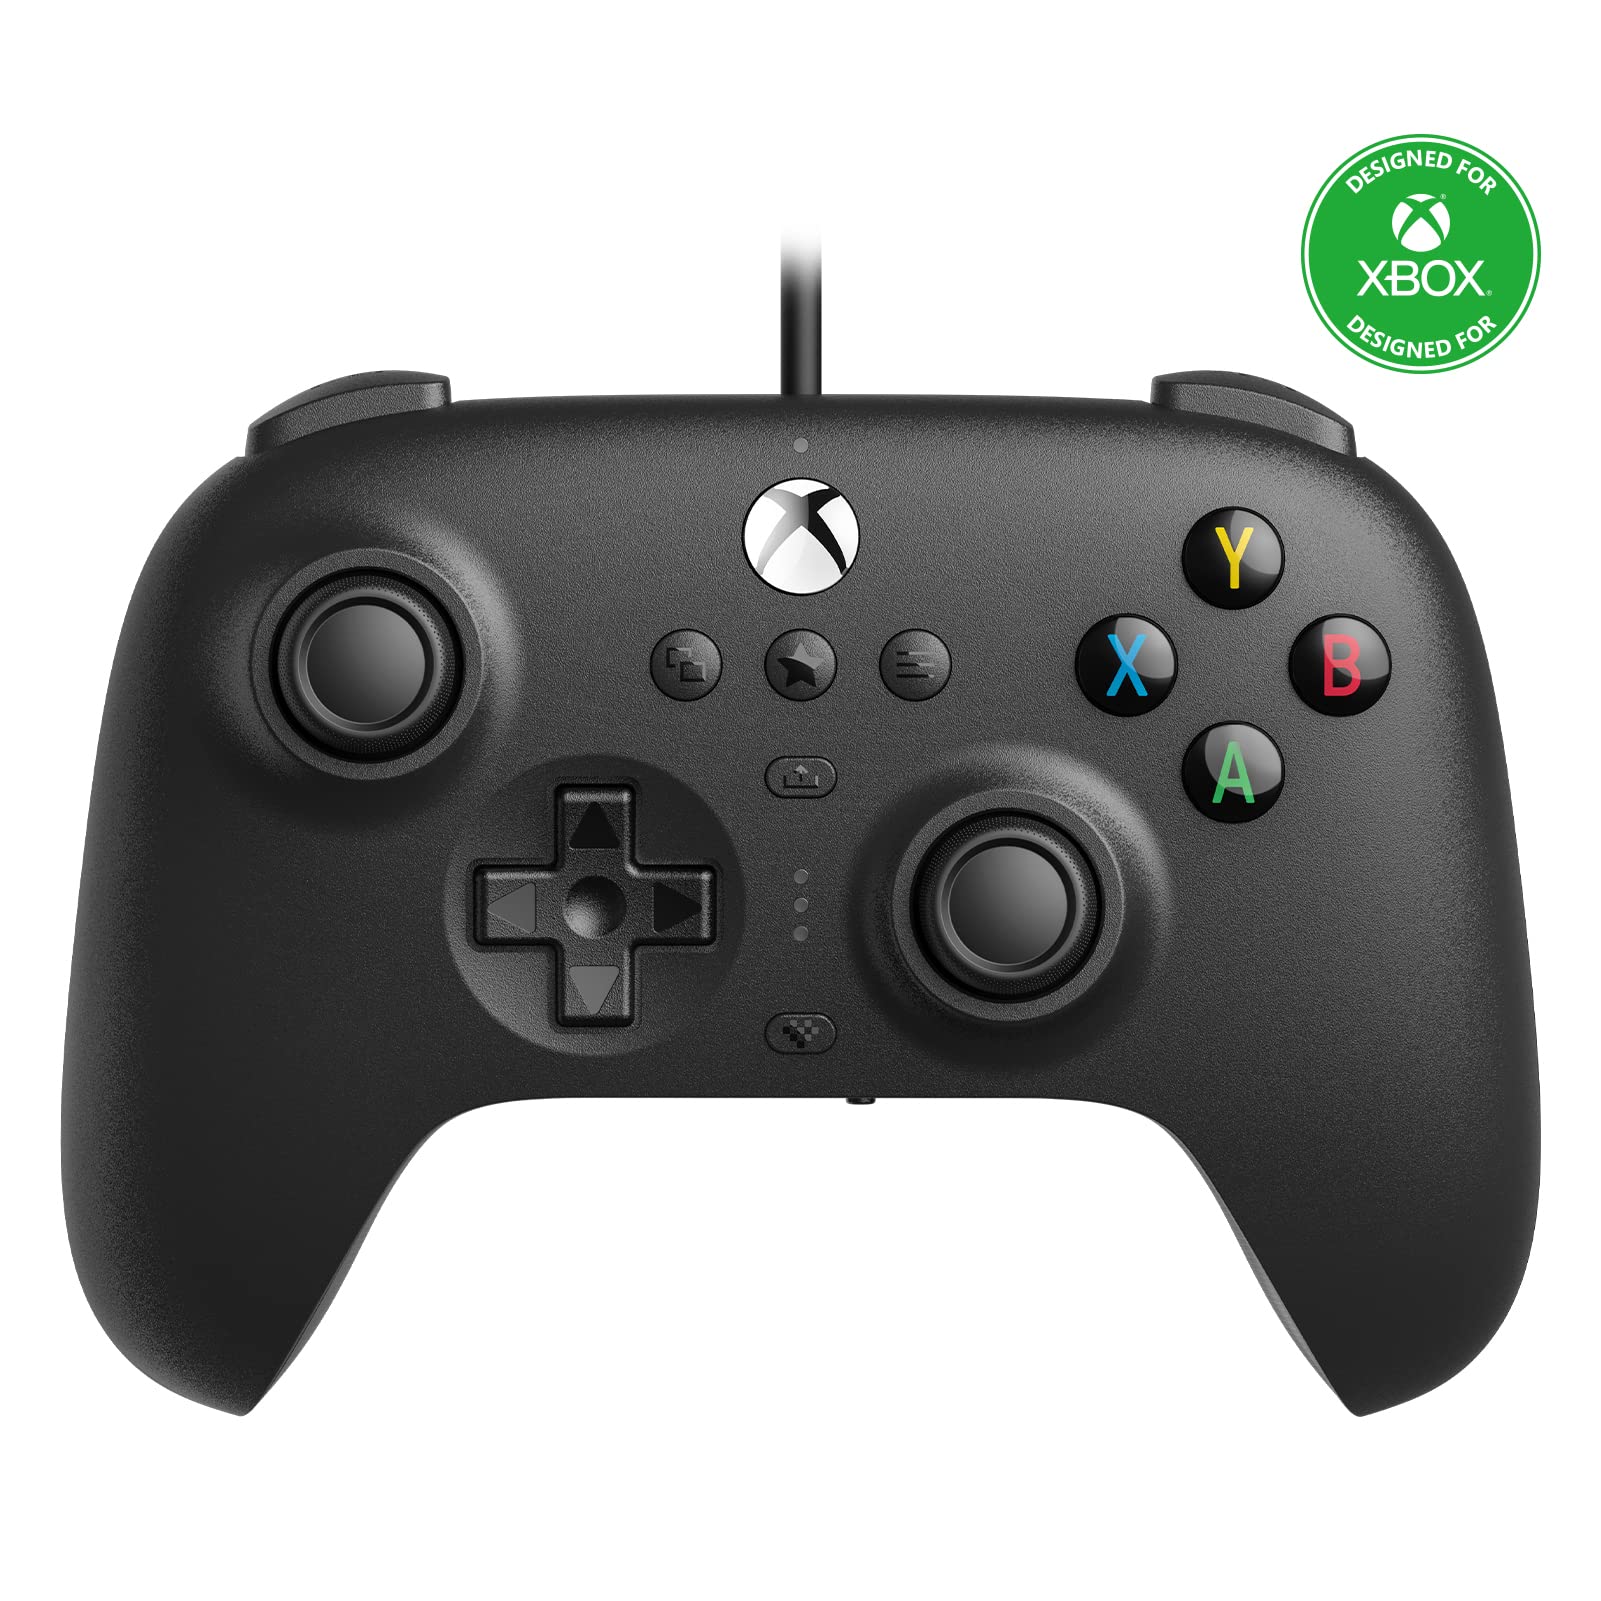 $25.32: 8Bitdo Ultimate Wired Controller for Xbox Series X, Xbox Series S, Xbox One, Windows 10 & Windows 11